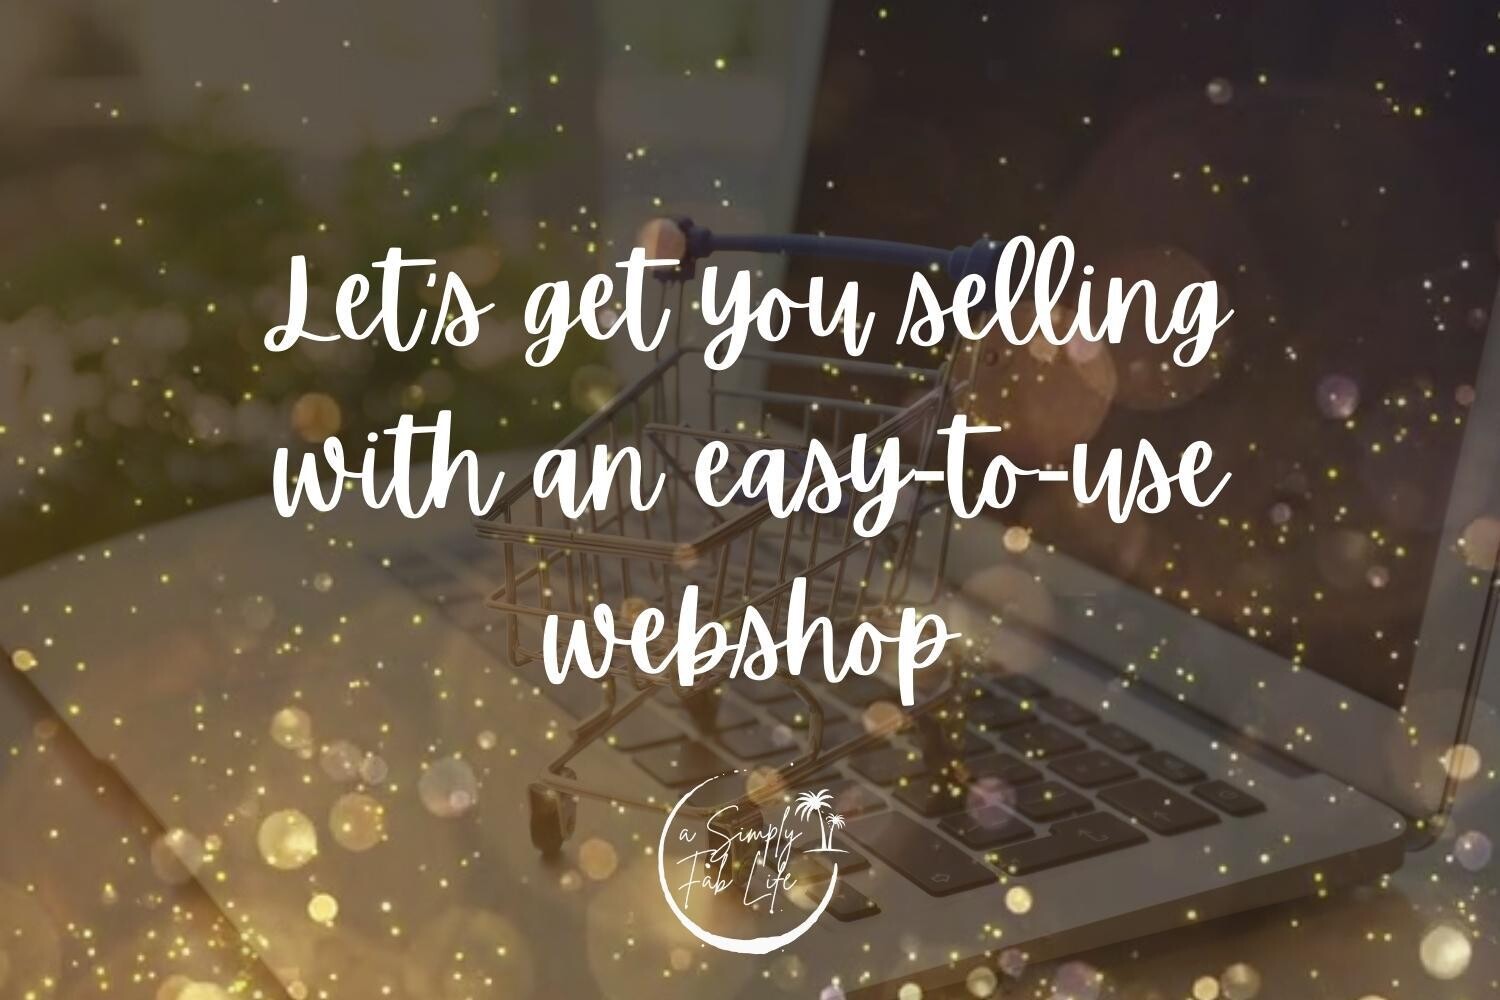 Online Business: Let's Get You Selling